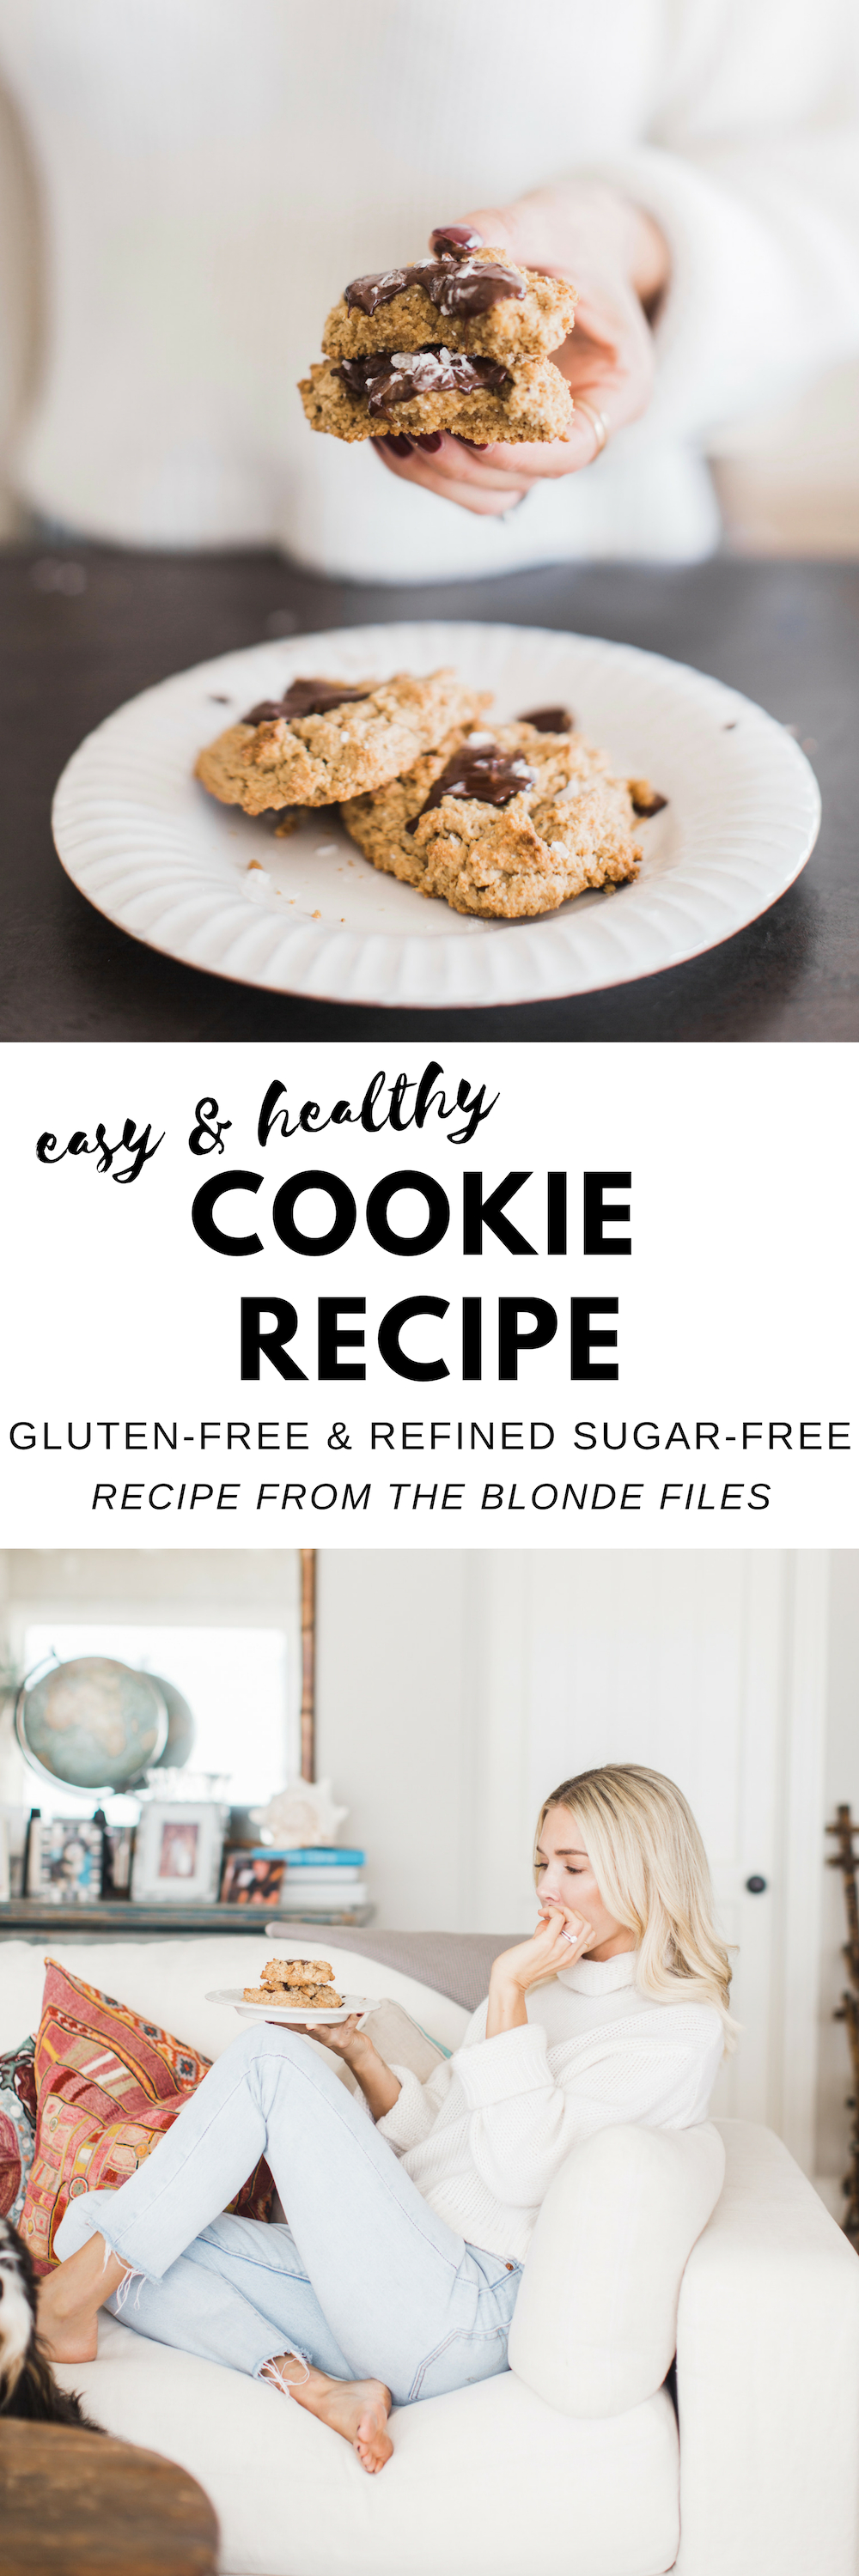 Gluten Free Cookie Recipe from The Blonde Files